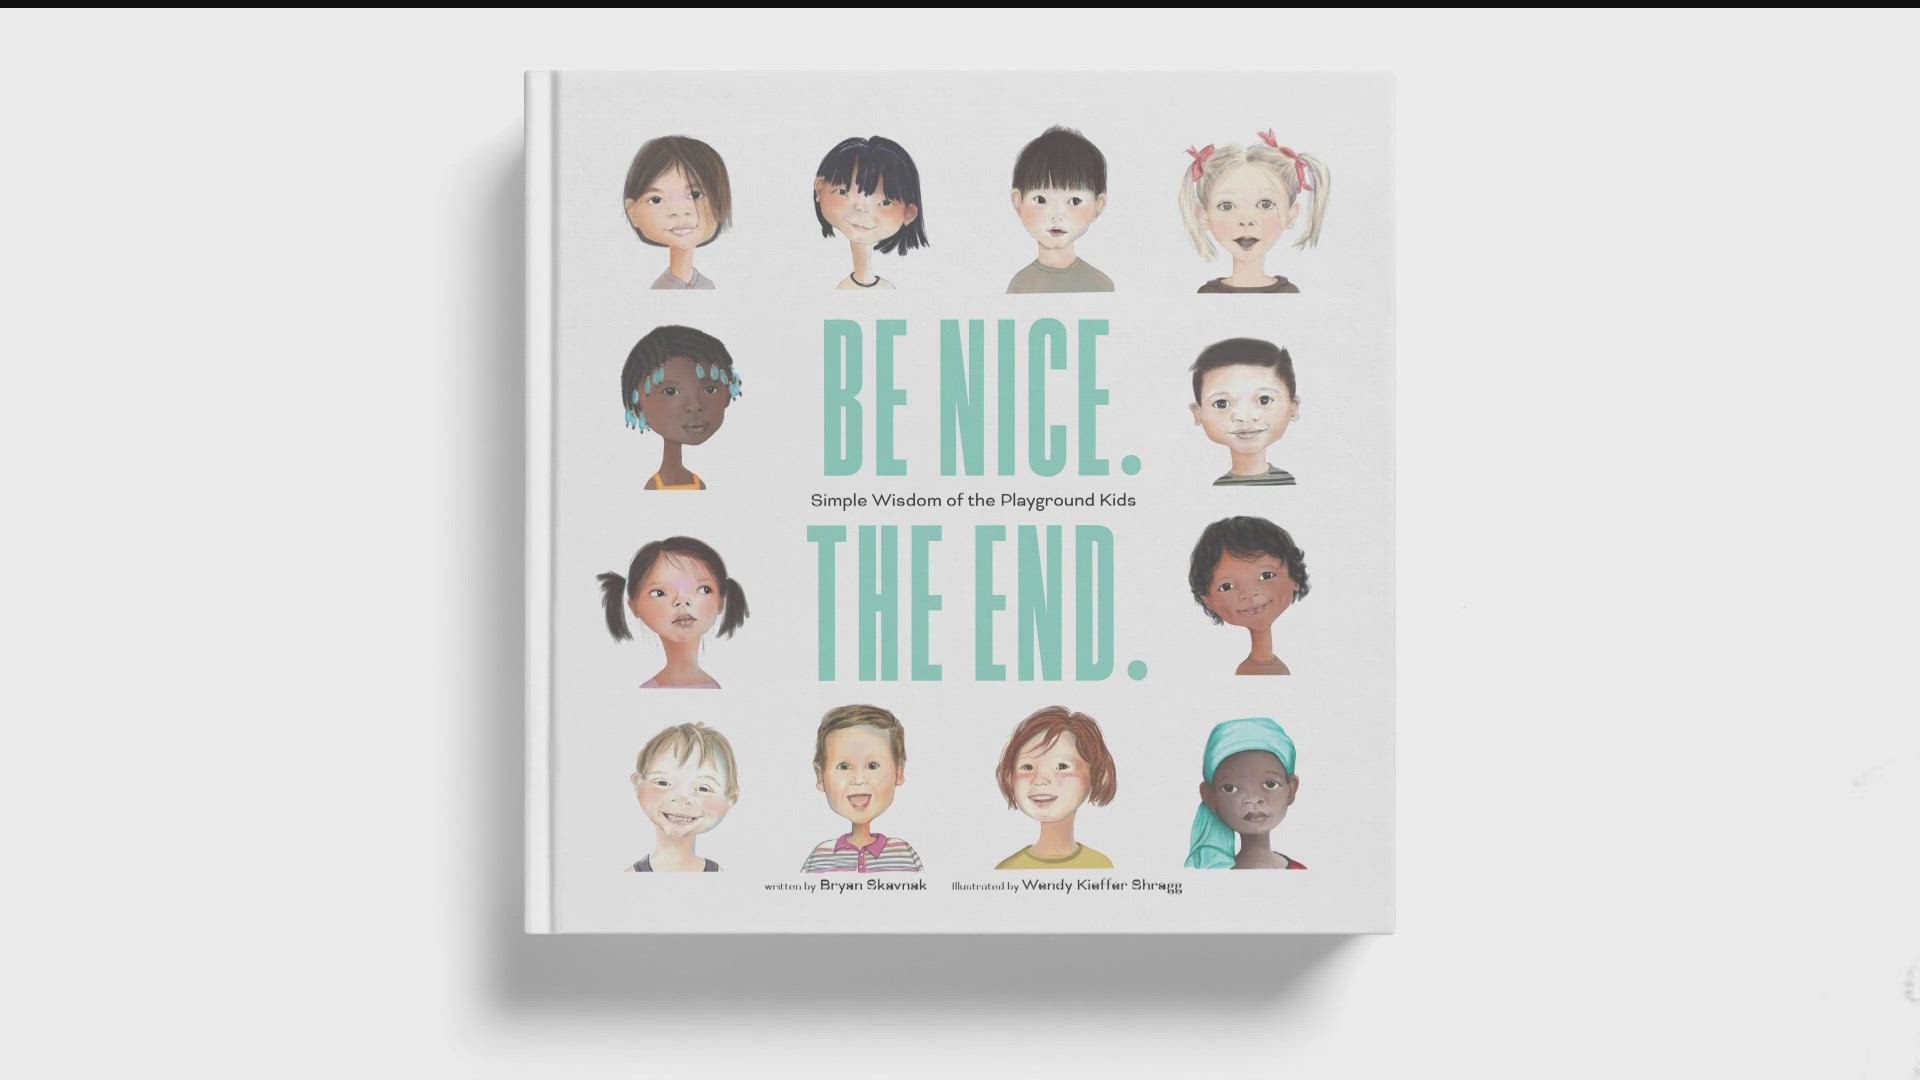 In their book, "Be. Nice. The End. Simple Wisdom of the Playground Kids," author Bryan Skavnak and illustrator Wendy Shragg hope to inspire acts of kindness.